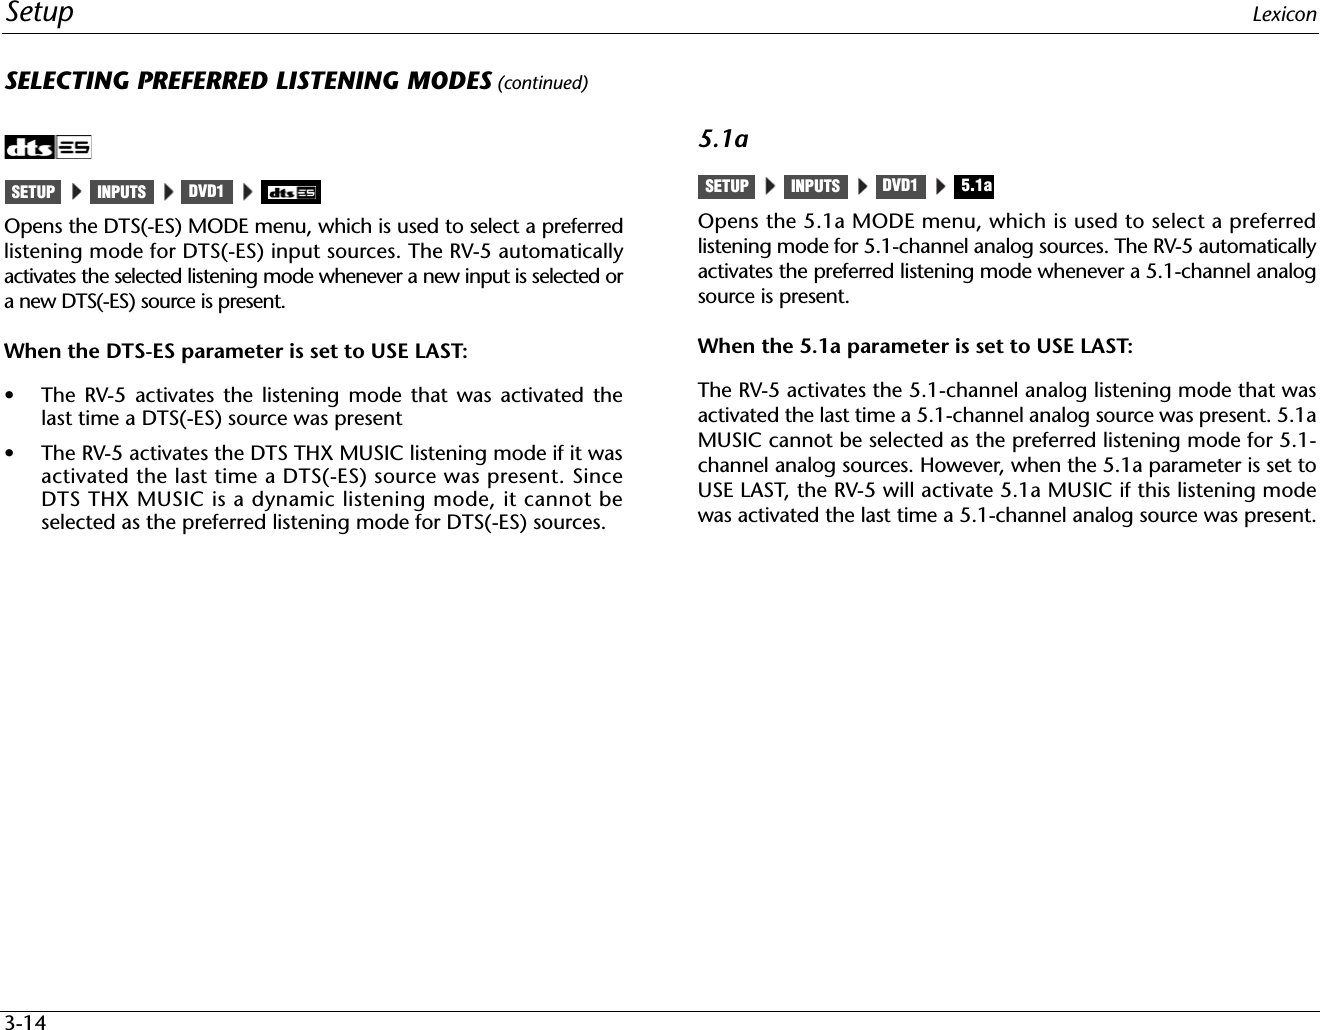 Setup Lexicon3-14SELECTING PREFERRED LISTENING MODES (continued)Opens the DTS(-ES) MODE menu, which is used to select a preferredlistening mode for DTS(-ES) input sources. The RV-5 automaticallyactivates the selected listening mode whenever a new input is selected ora new DTS(-ES) source is present.When the DTS-ES parameter is set to USE LAST:• The RV-5 activates the listening mode that was activated thelast time a DTS(-ES) source was present• The RV-5 activates the DTS THX MUSIC listening mode if it wasactivated the last time a DTS(-ES) source was present. SinceDTS THX MUSIC is a dynamic listening mode, it cannot beselected as the preferred listening mode for DTS(-ES) sources.5.1aOpens the 5.1a MODE menu, which is used to select a preferredlistening mode for 5.1-channel analog sources. The RV-5 automaticallyactivates the preferred listening mode whenever a 5.1-channel analogsource is present.When the 5.1a parameter is set to USE LAST:The RV-5 activates the 5.1-channel analog listening mode that wasactivated the last time a 5.1-channel analog source was present. 5.1aMUSIC cannot be selected as the preferred listening mode for 5.1-channel analog sources. However, when the 5.1a parameter is set toUSE LAST, the RV-5 will activate 5.1a MUSIC if this listening modewas activated the last time a 5.1-channel analog source was present.INPUTSSETUP DVD1 INPUTSSETUP DVD1 5.1a